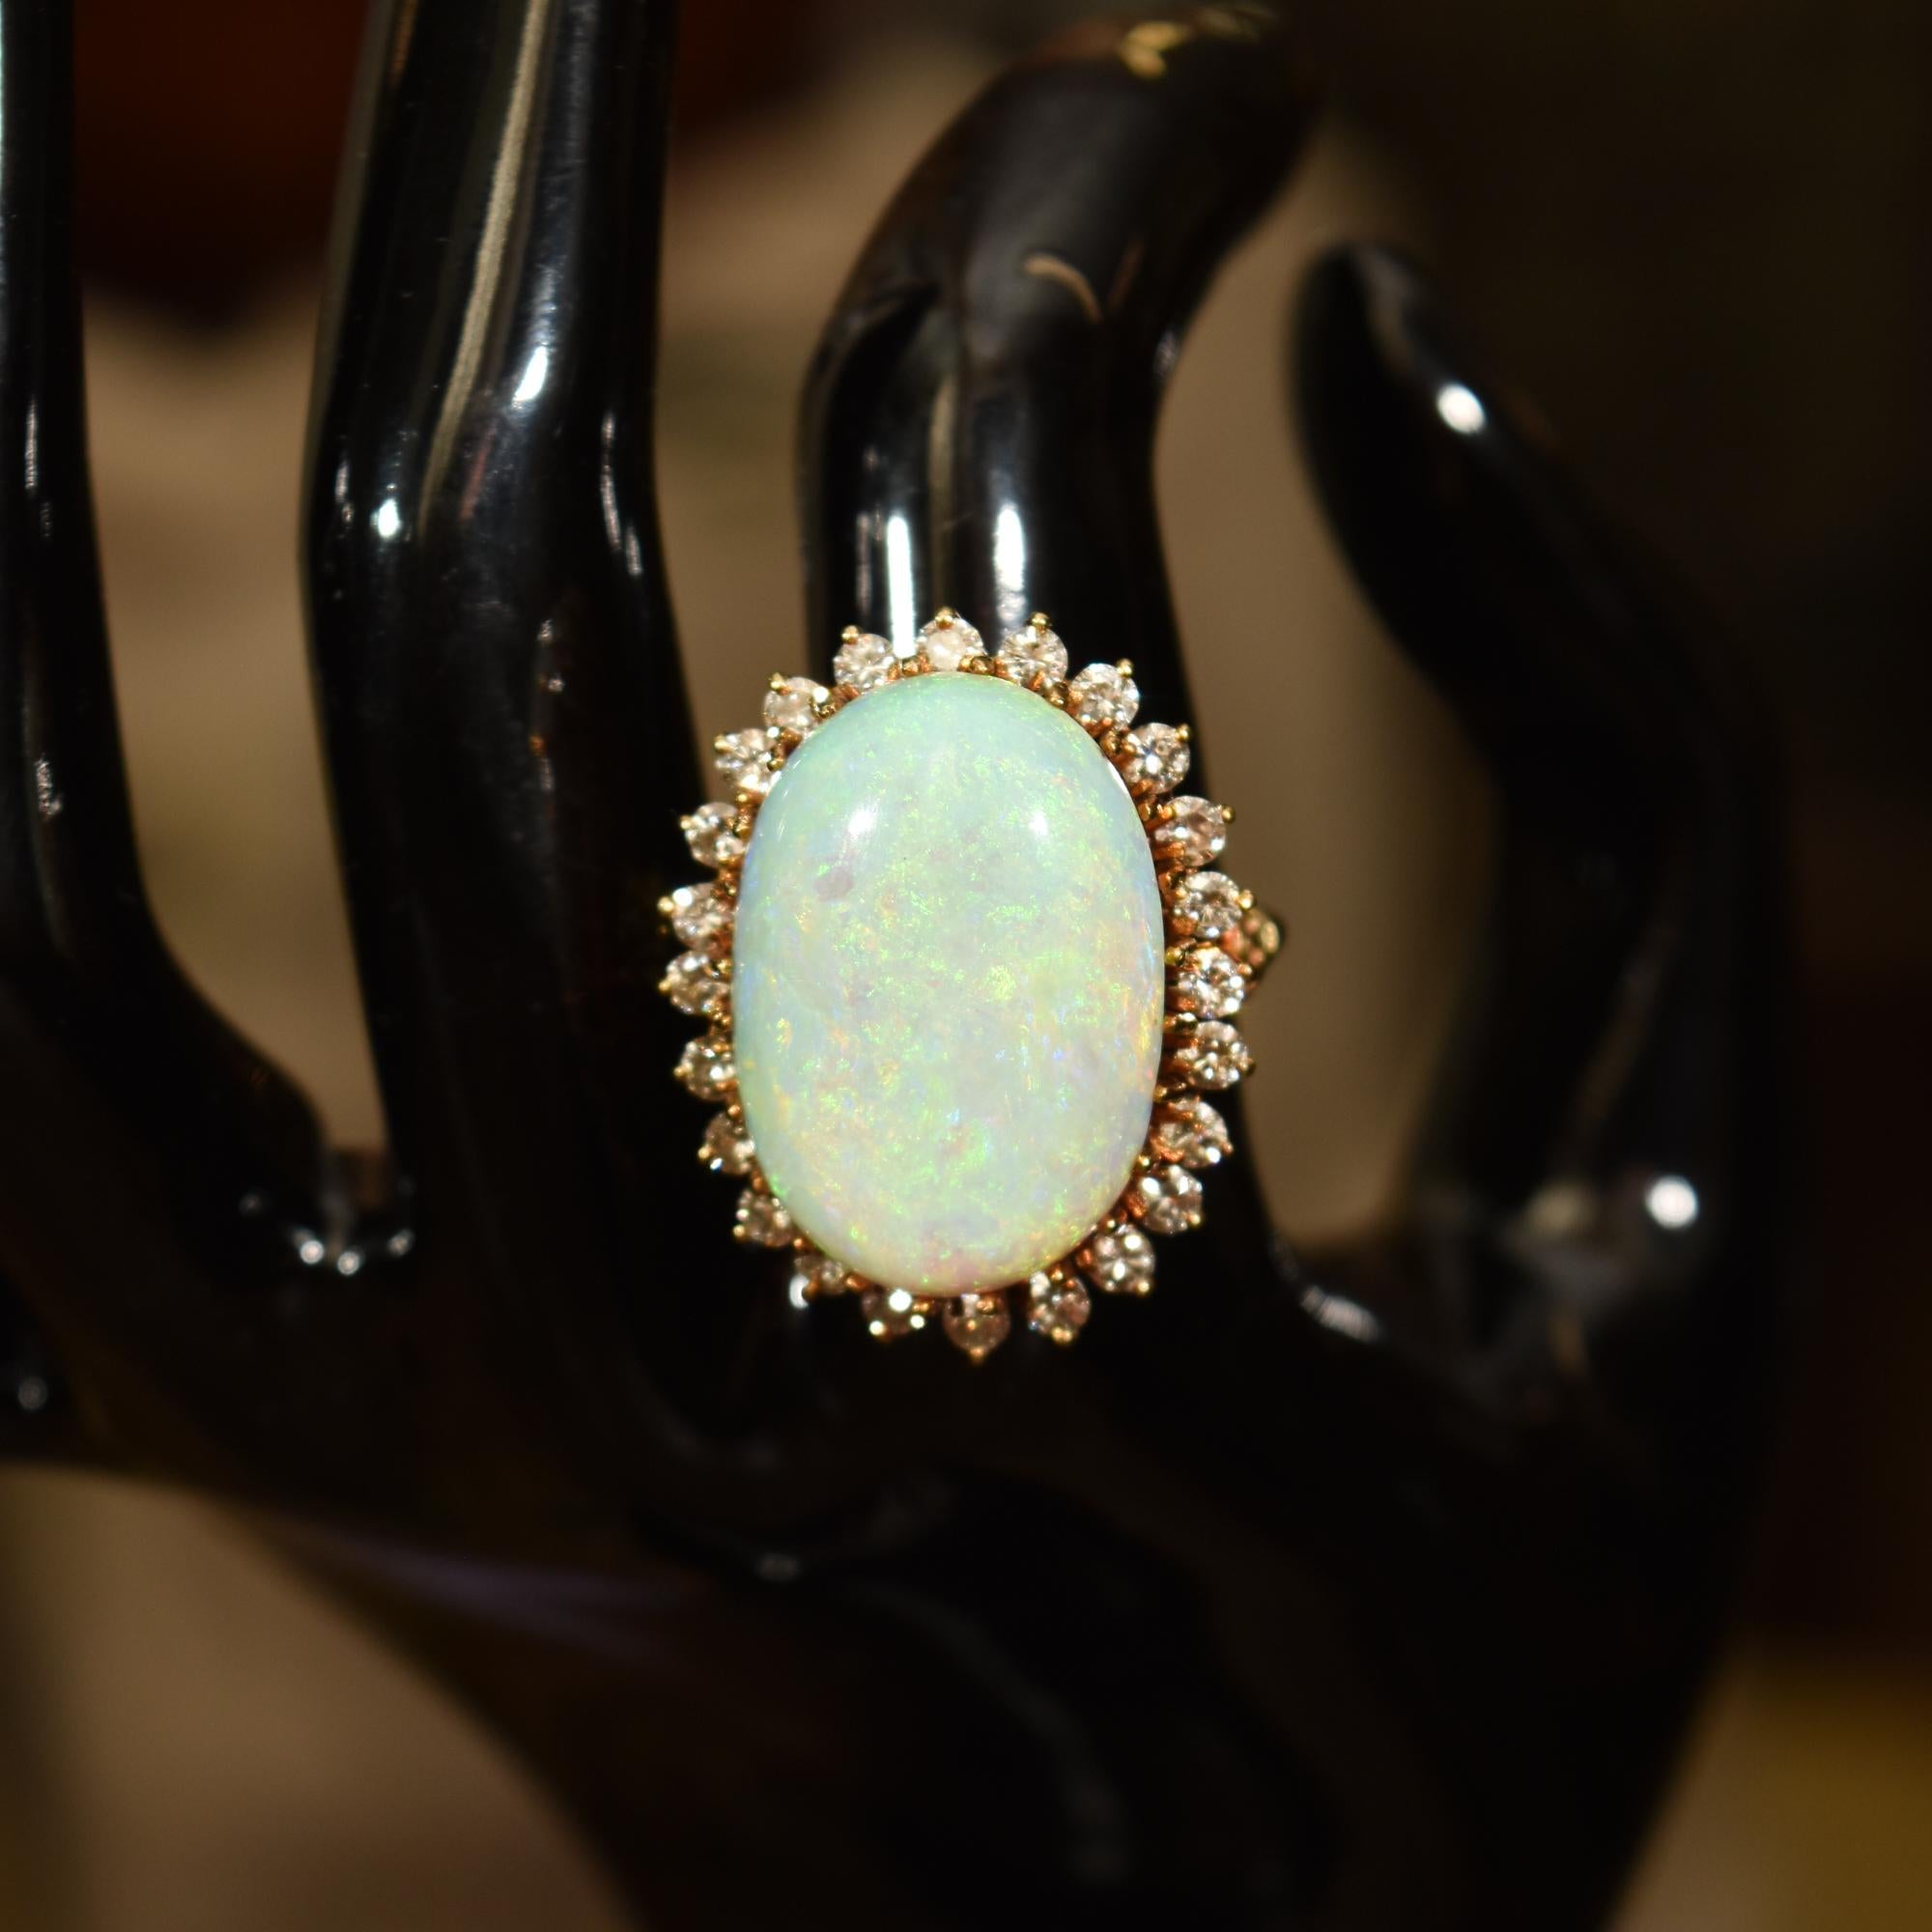 An astounding estate 14K opal diamond halo cocktail ring. Features a huge oval white opal cabochon, 18kt two-tone gold opal and diamond halo ring. Featuring an oval shape cabochon opal center stone, estimated at 14 carat, measuring approximately